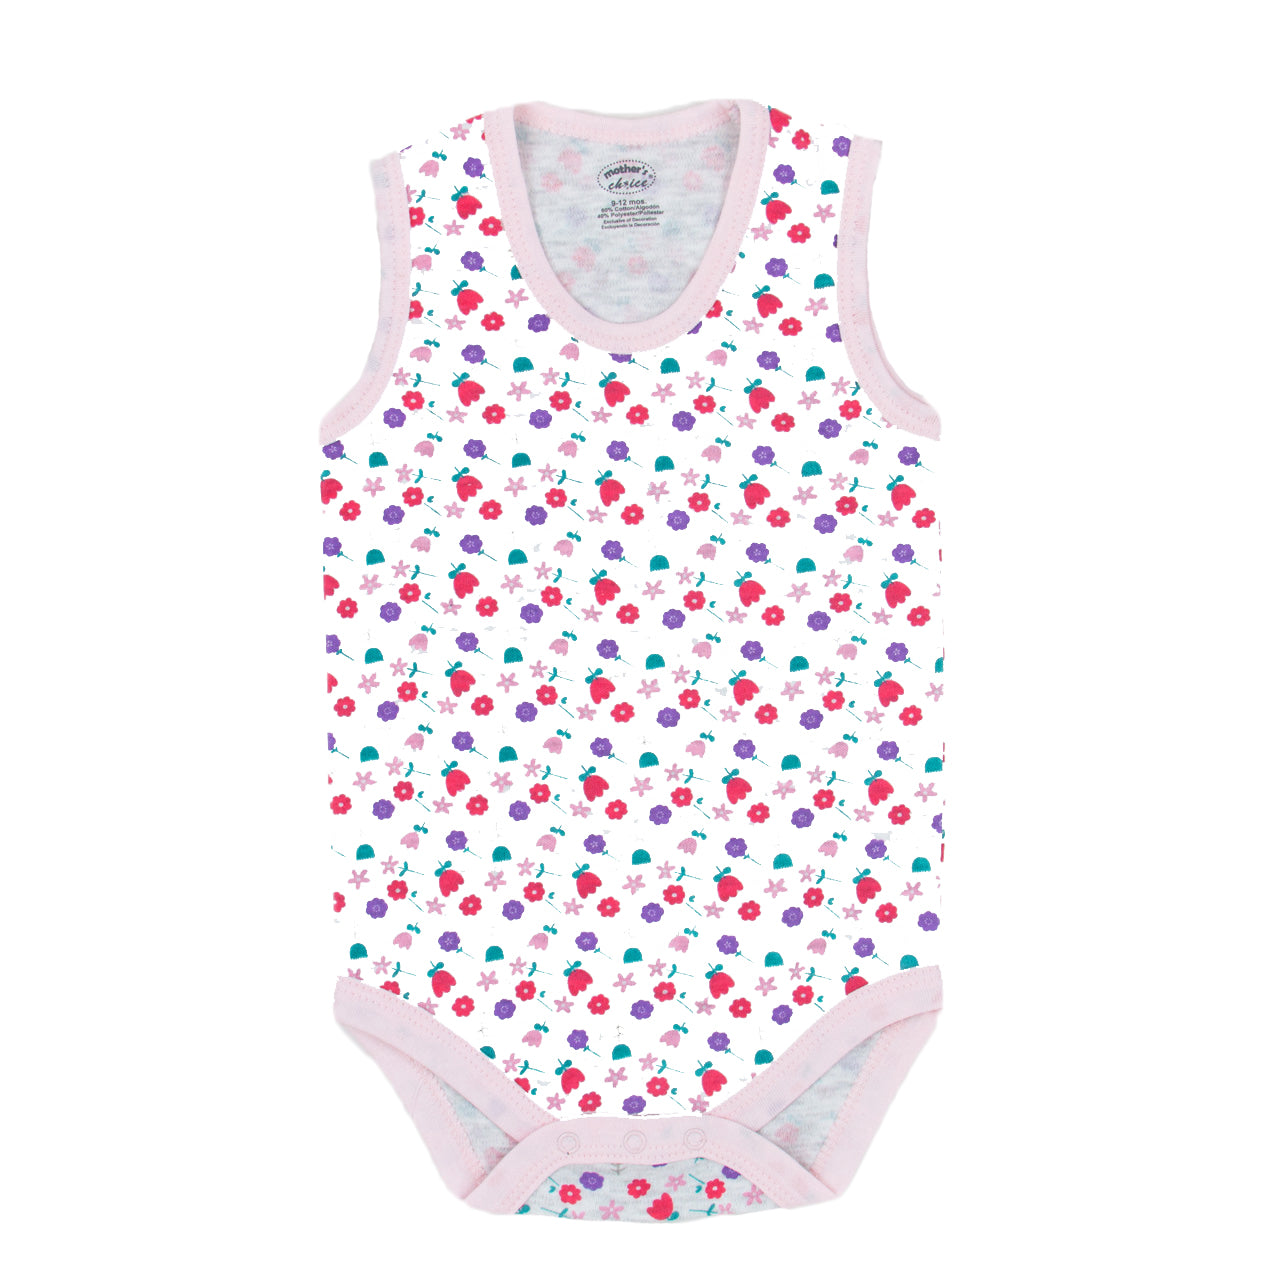 Mother's Choice 3 Pack Sleeveless Onesie (Sweet Home/IT2356)